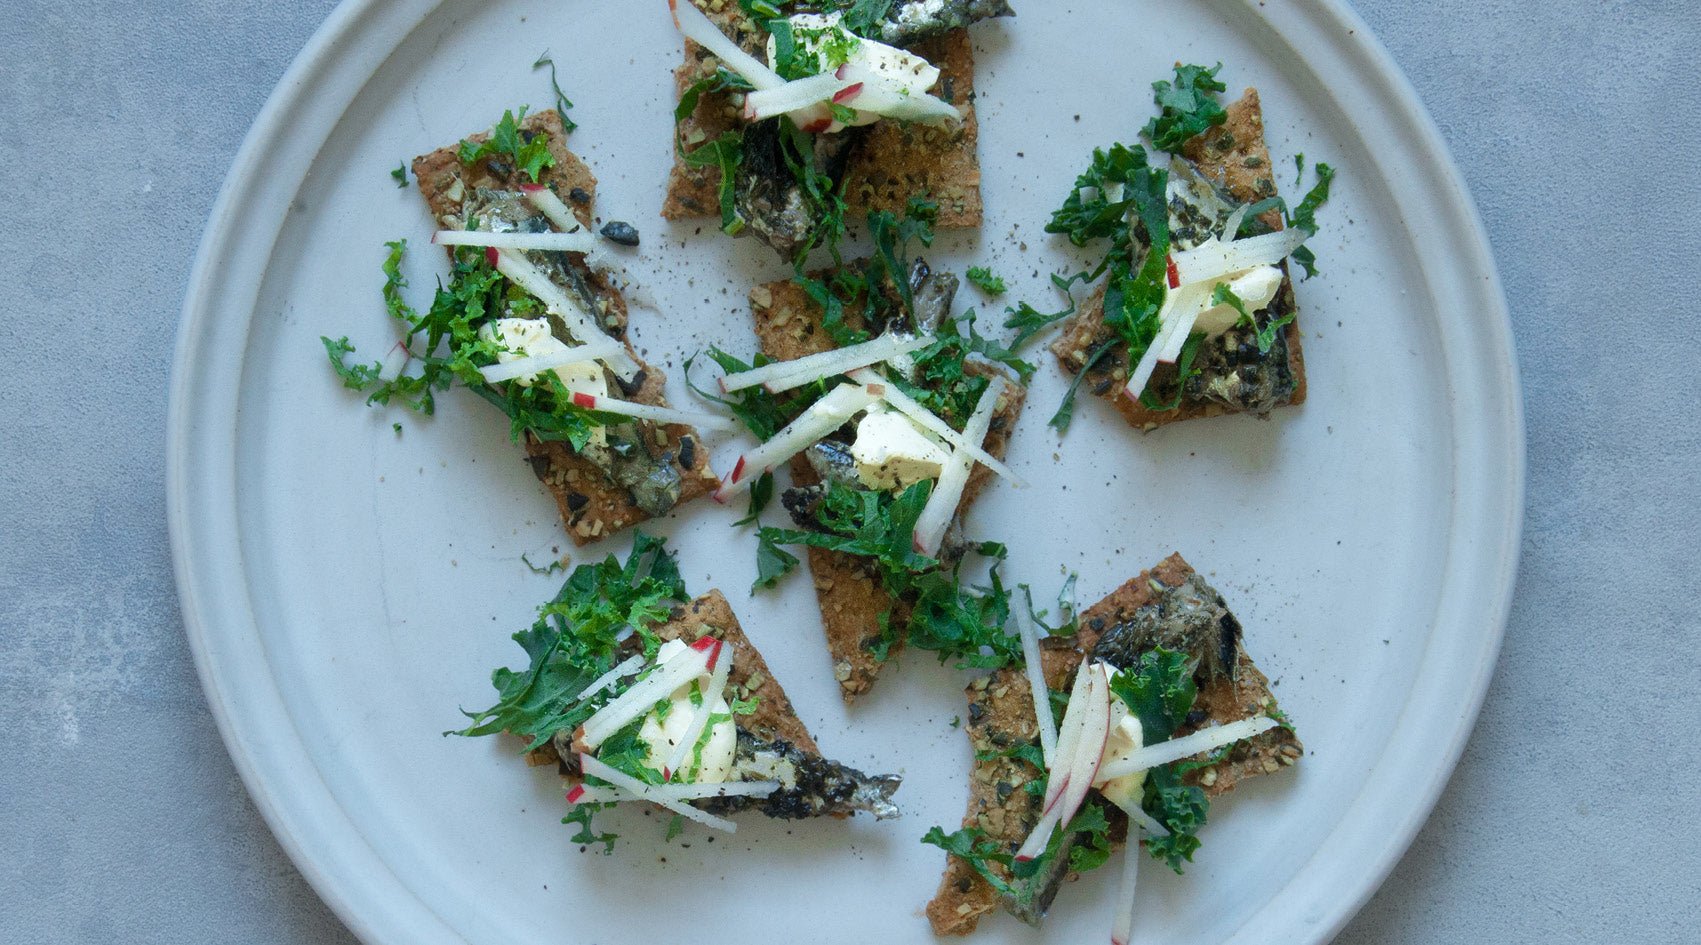 Nordic sardines on crispbread, apple and green cabbage - FANGST